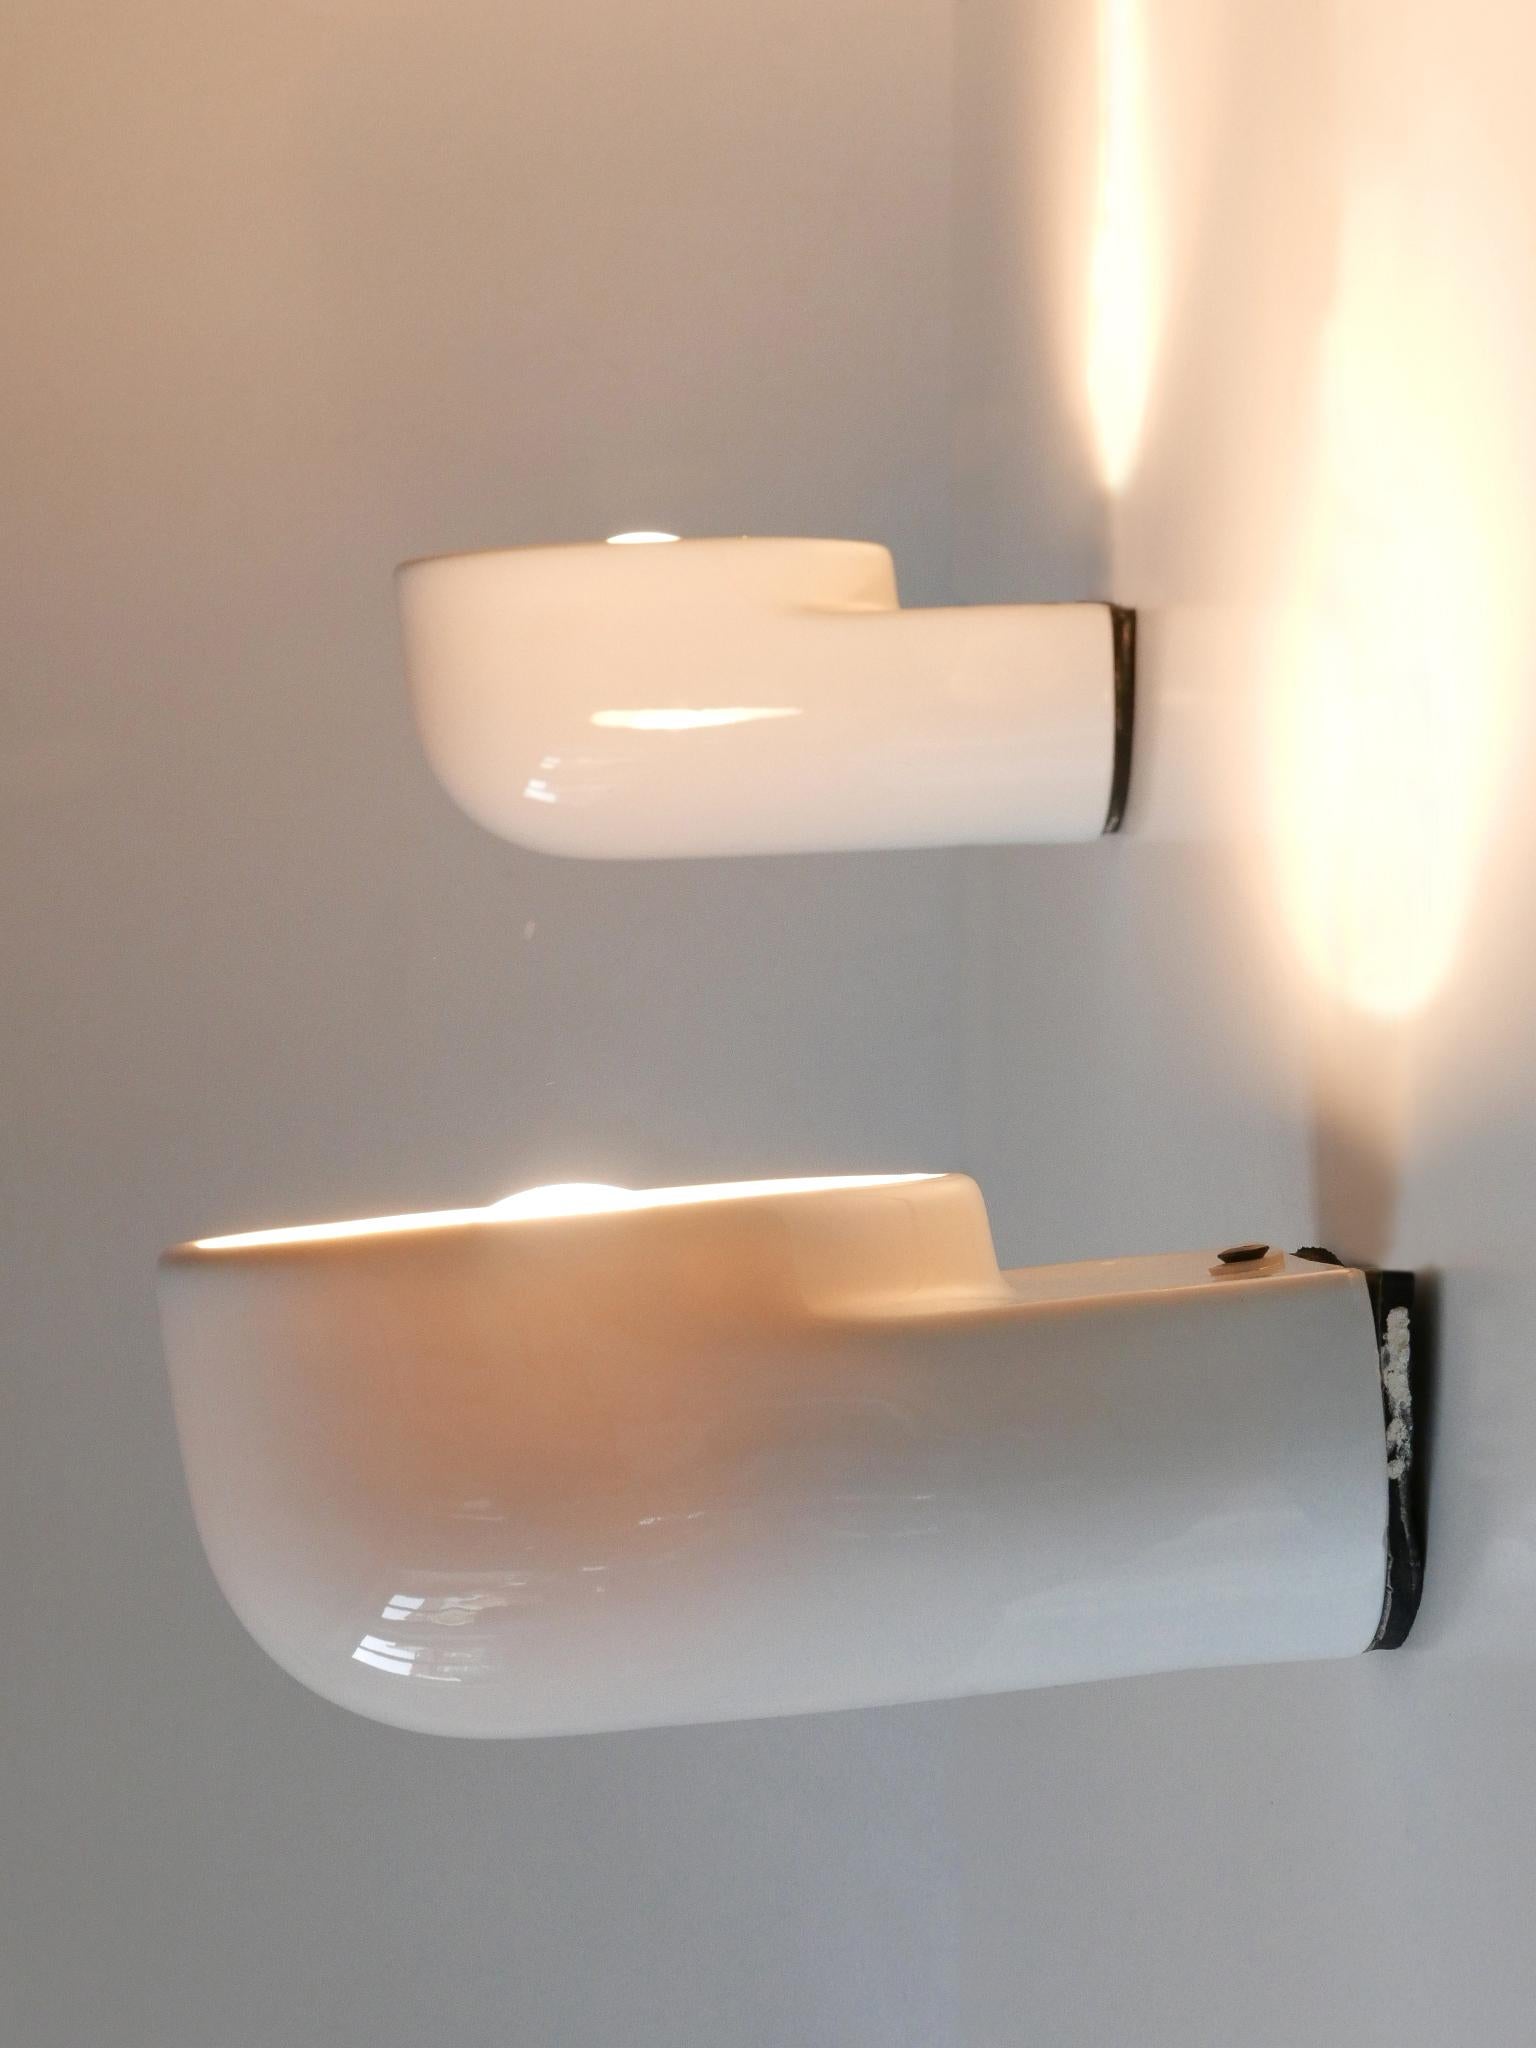 Glazed Set of Two Mid-Century Modern Up & Down Lighter Sconces Pafo by Artemide 1970s